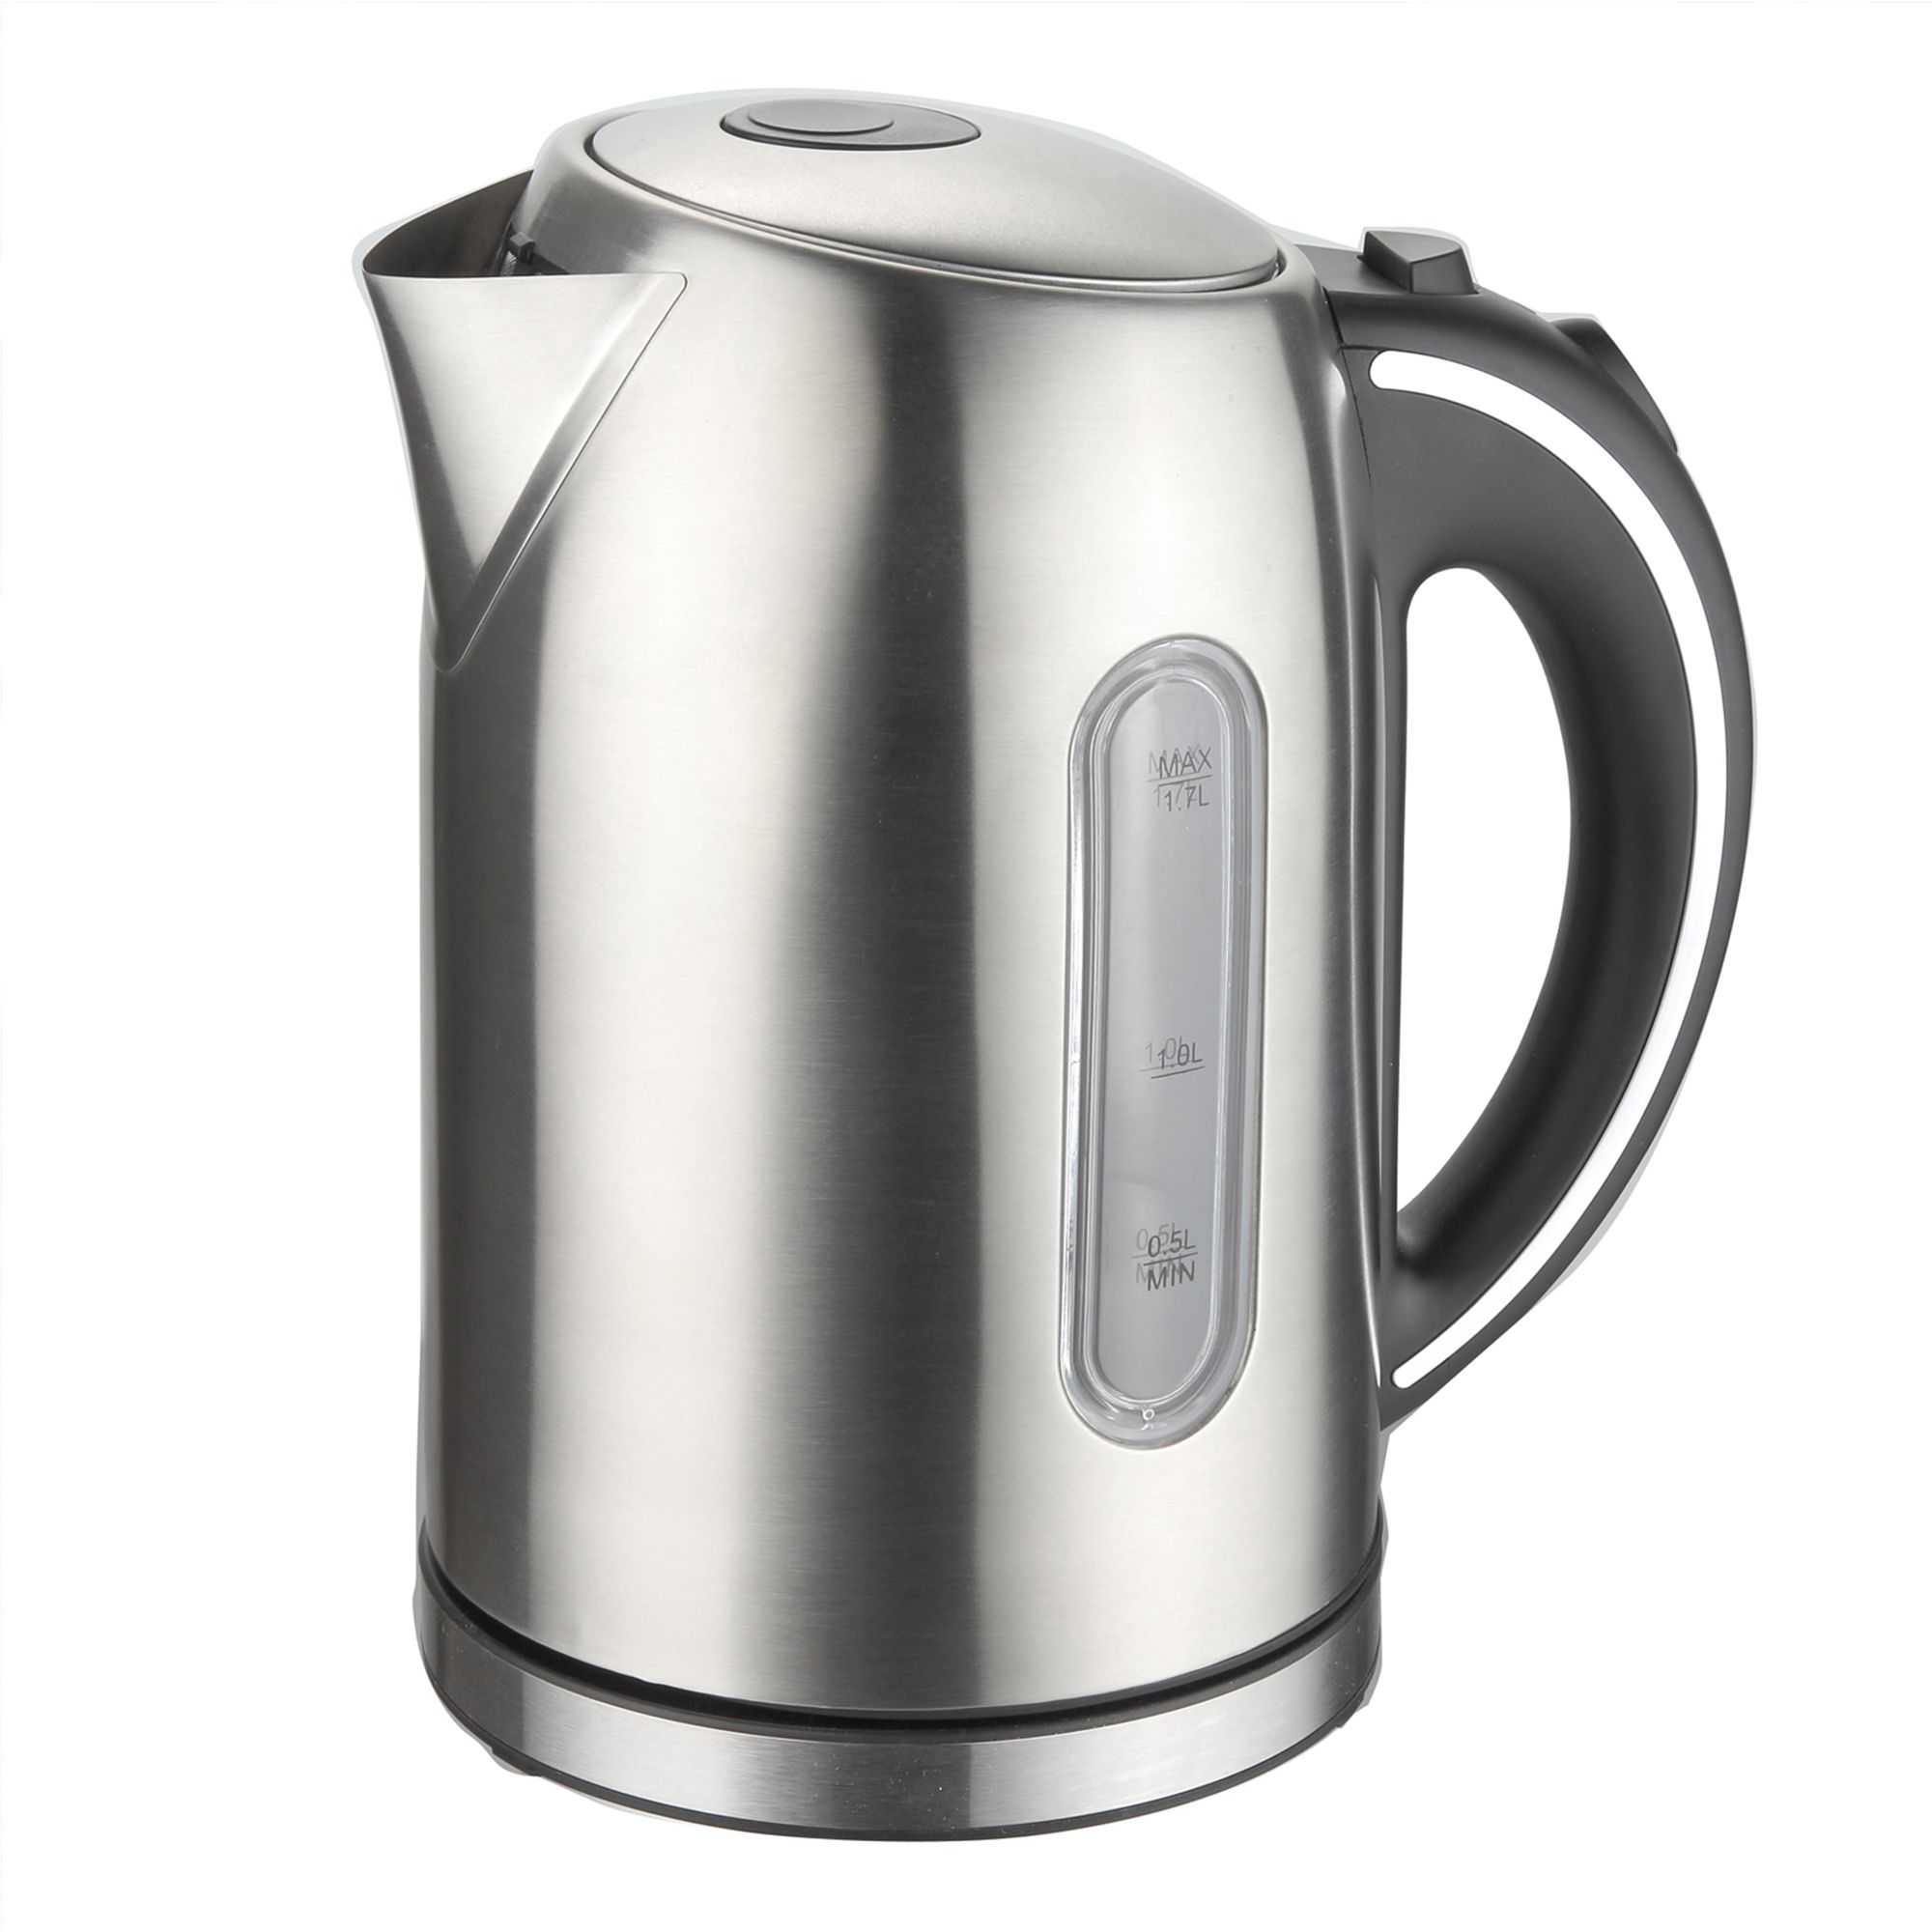 Raw Tea Kettle® Refurbished Glass Electric Brewing System